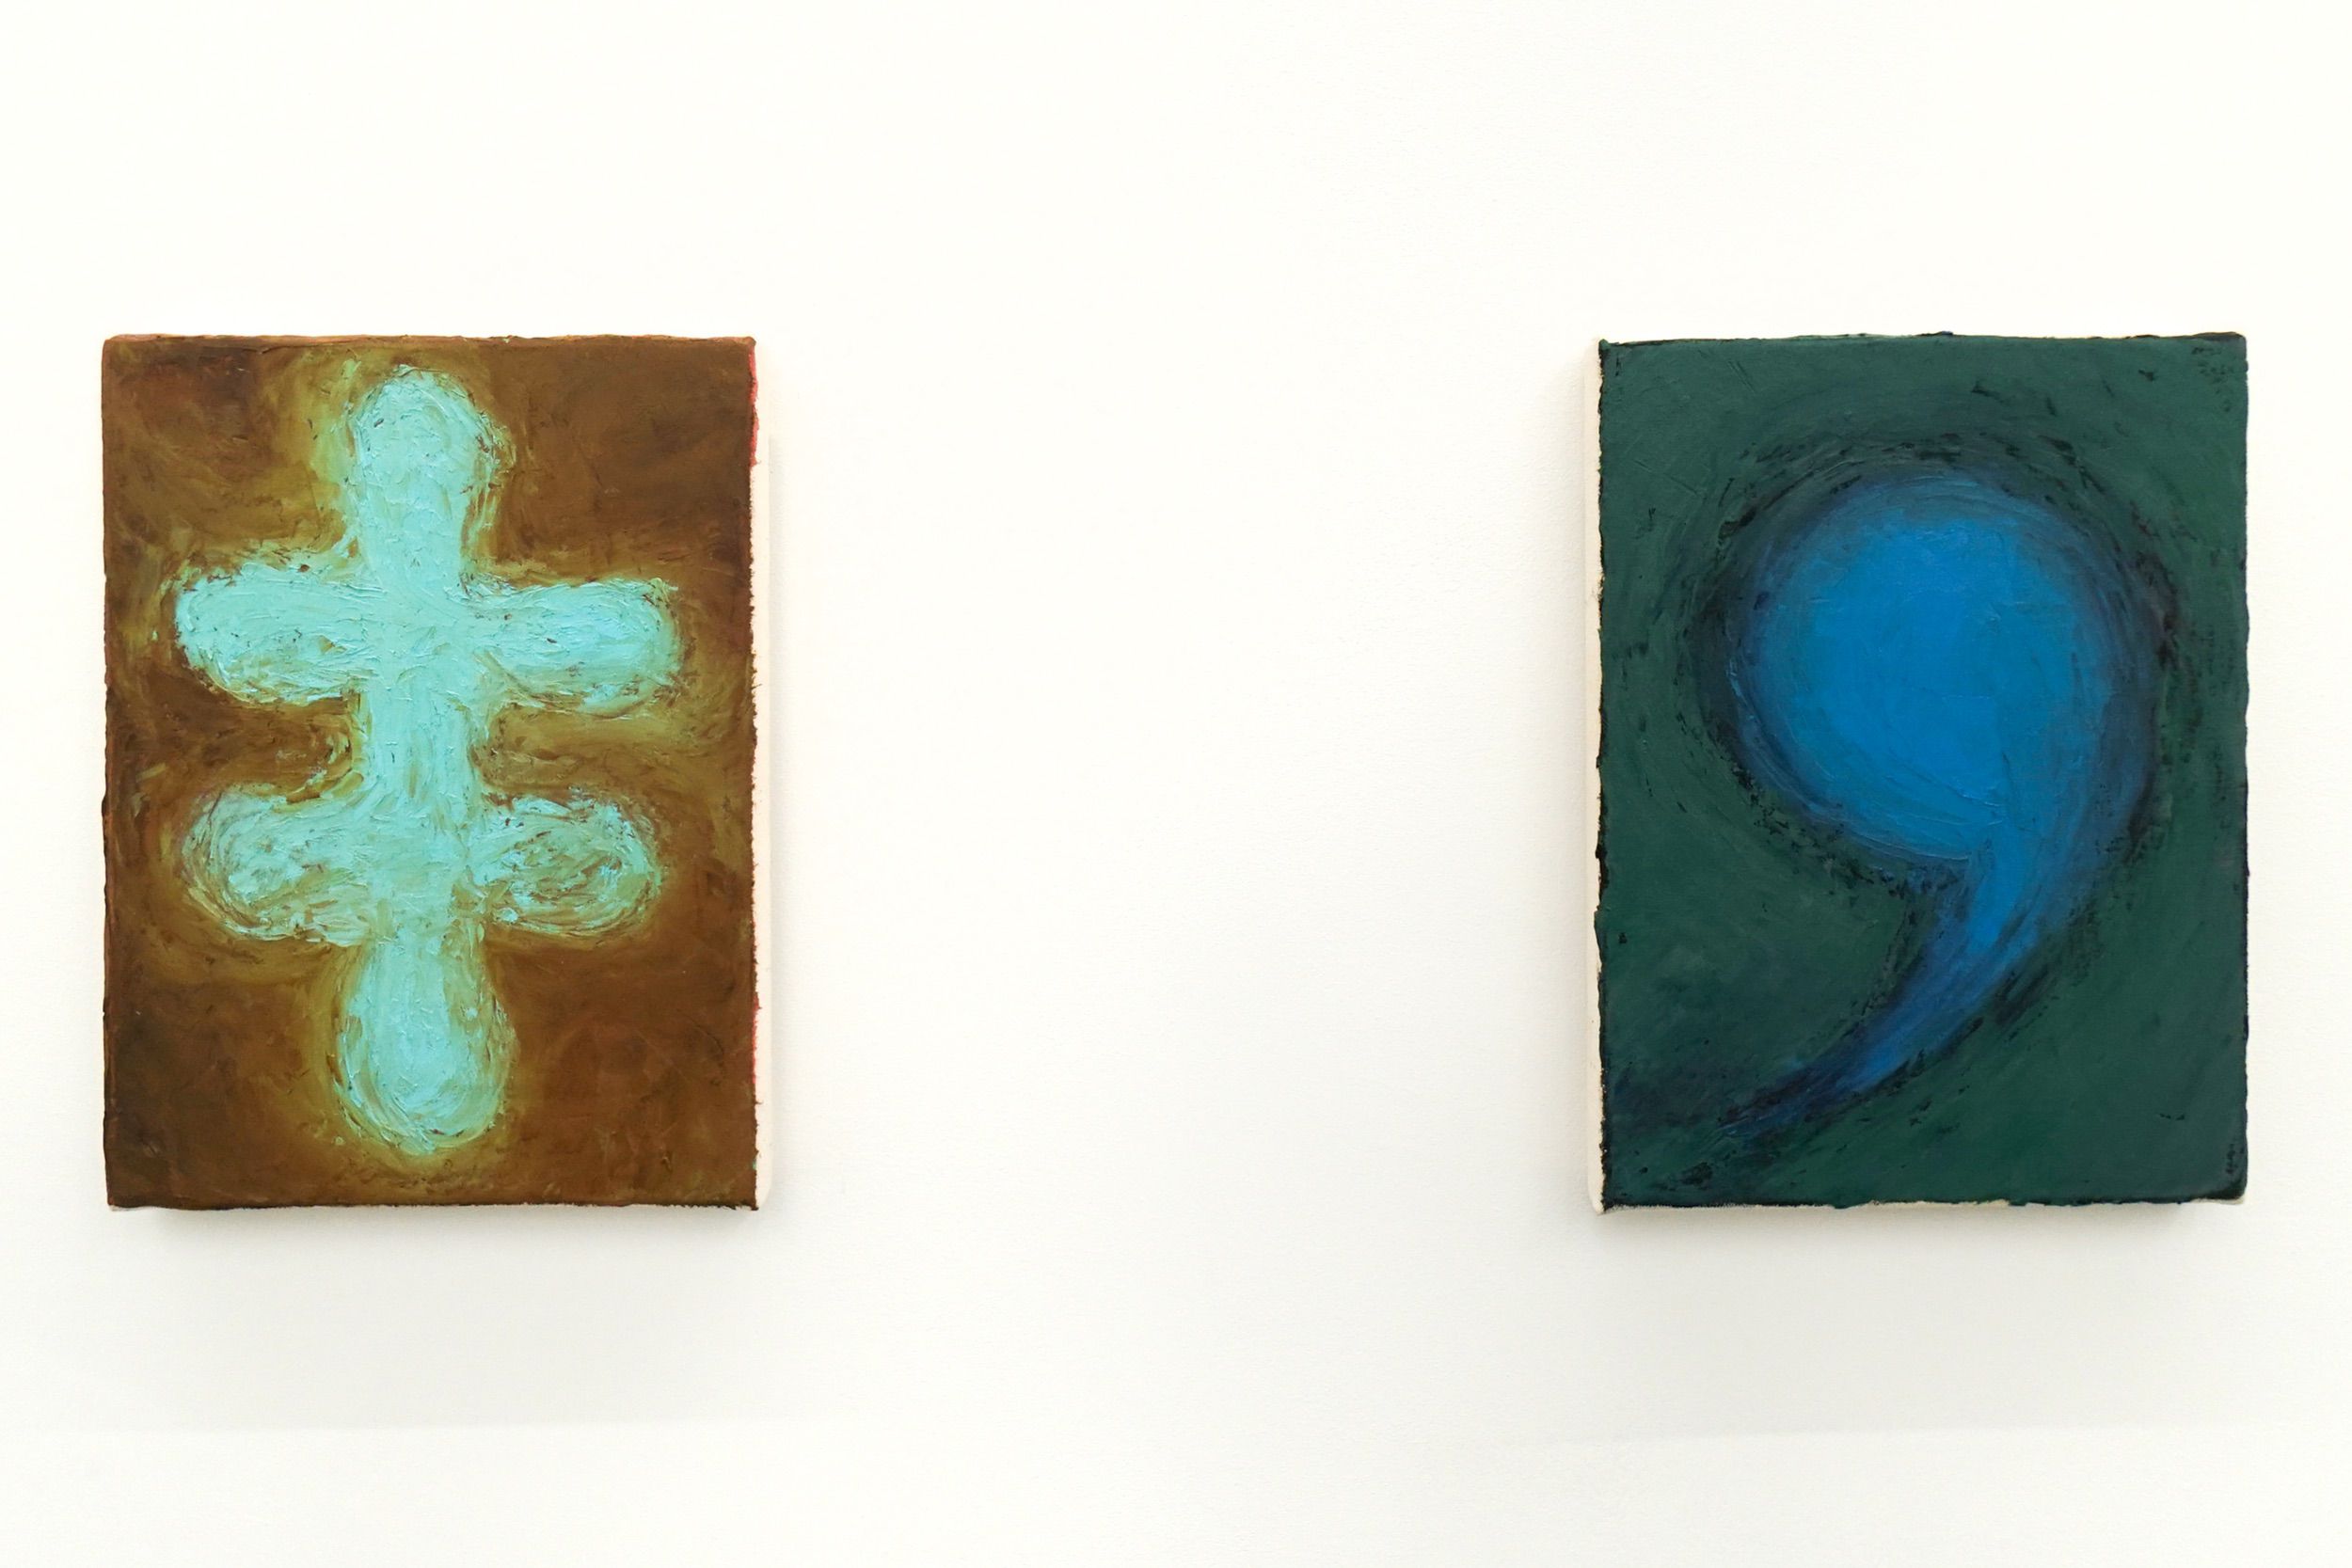  Left to right: Keith J. Varadi  Piece of Mine , 2012-2019 Oil and canvas 12 x 9 inches  Keith J. Varadi  World Comma (Comma of the World) , 2012-2019 Oil and canvas 12 x 9 inches 